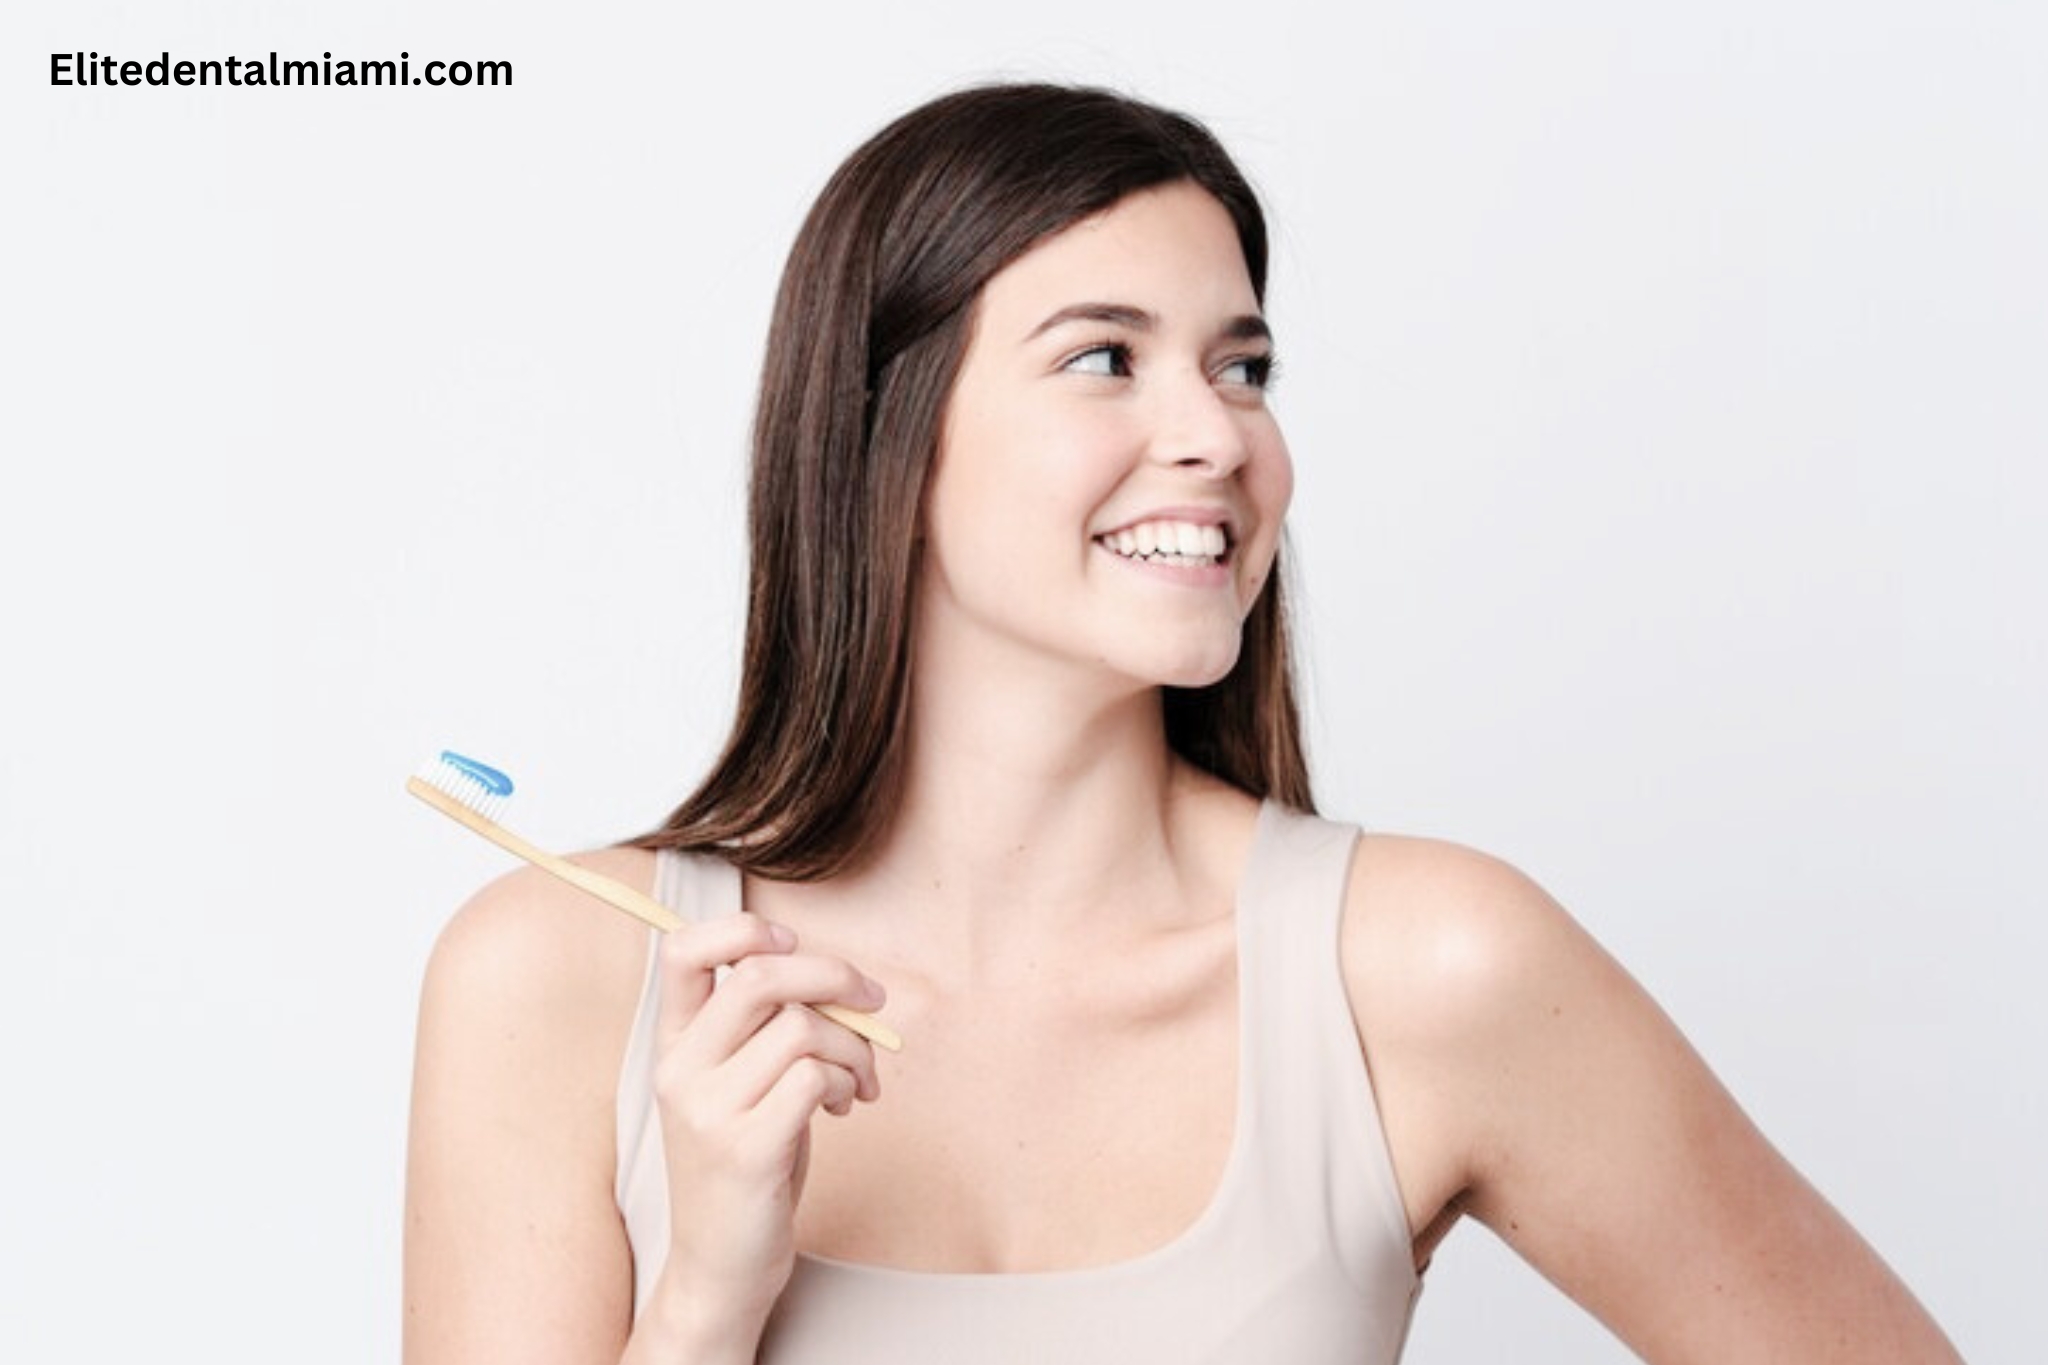 Can You Brush Your Teeth After Whitening Strips